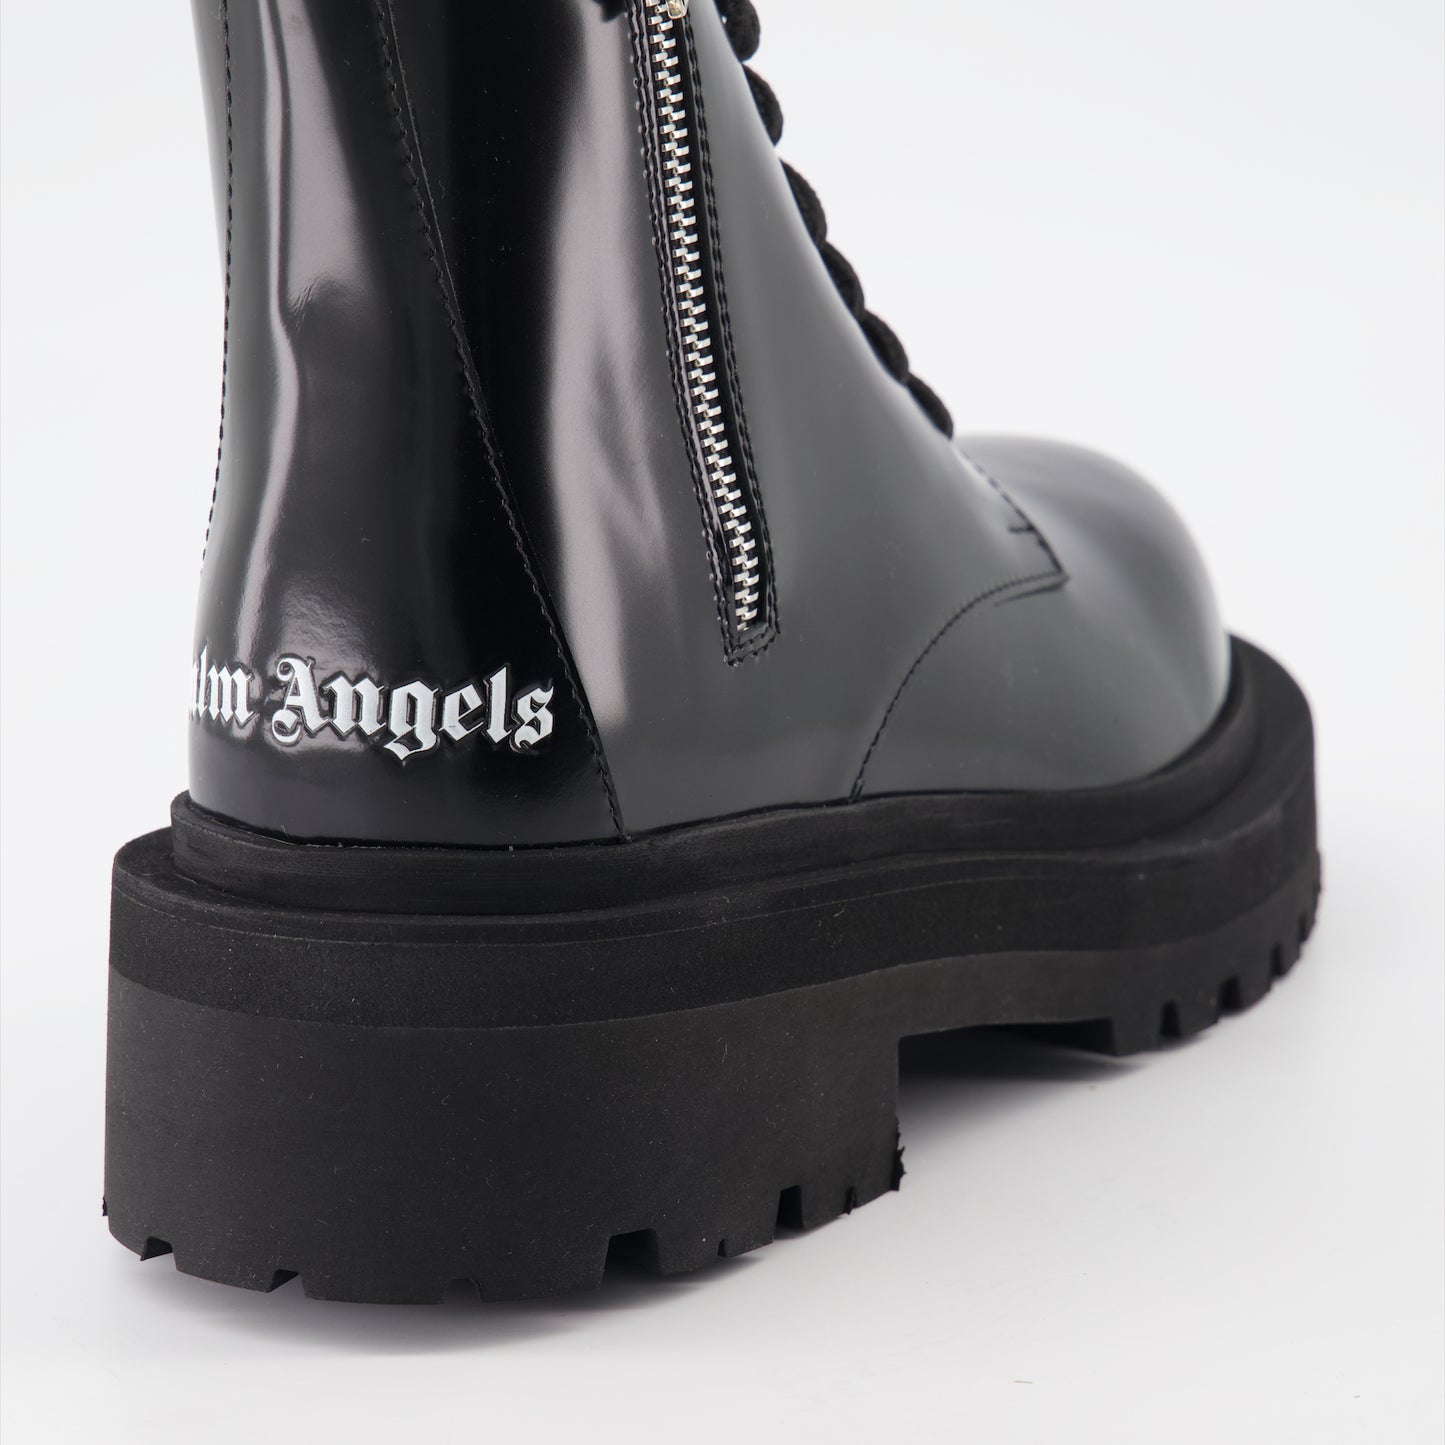 Combat Ankle Boots